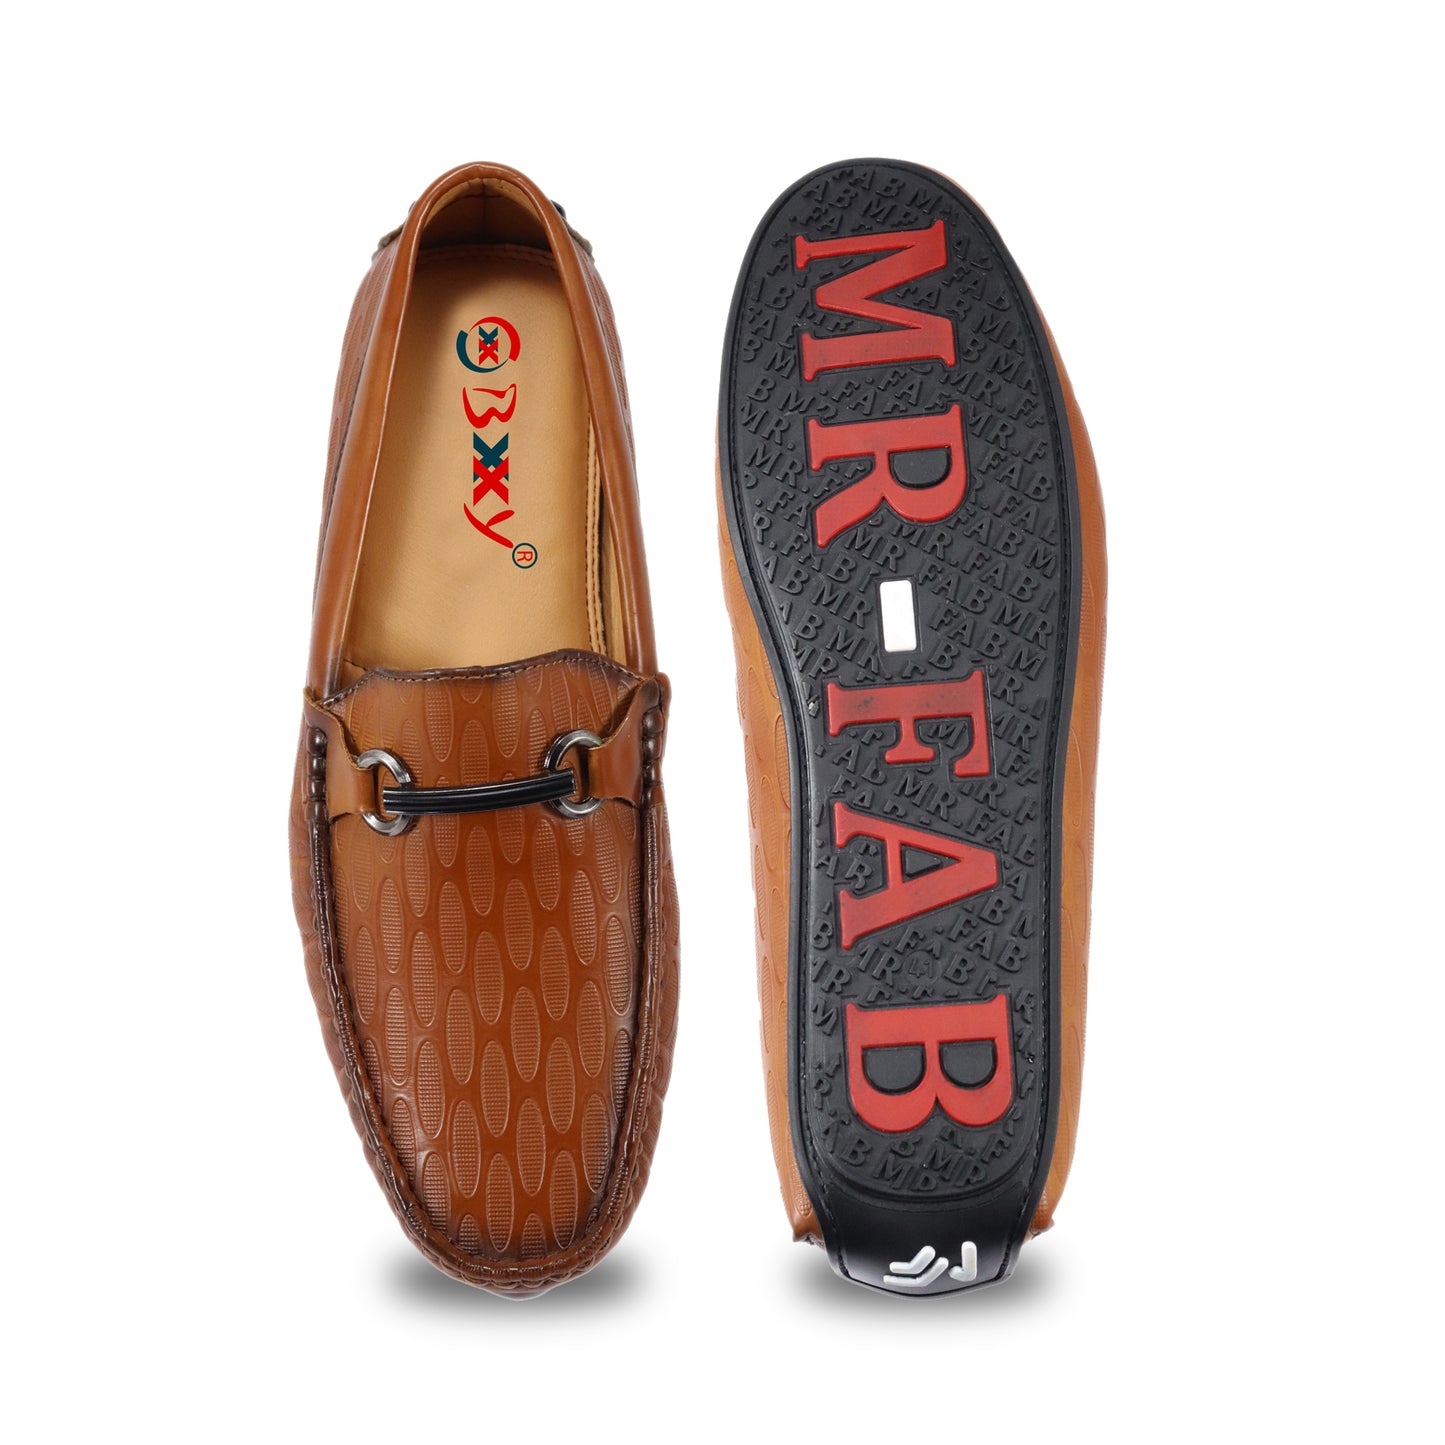 Men's Stylish Latest Casual Loafers